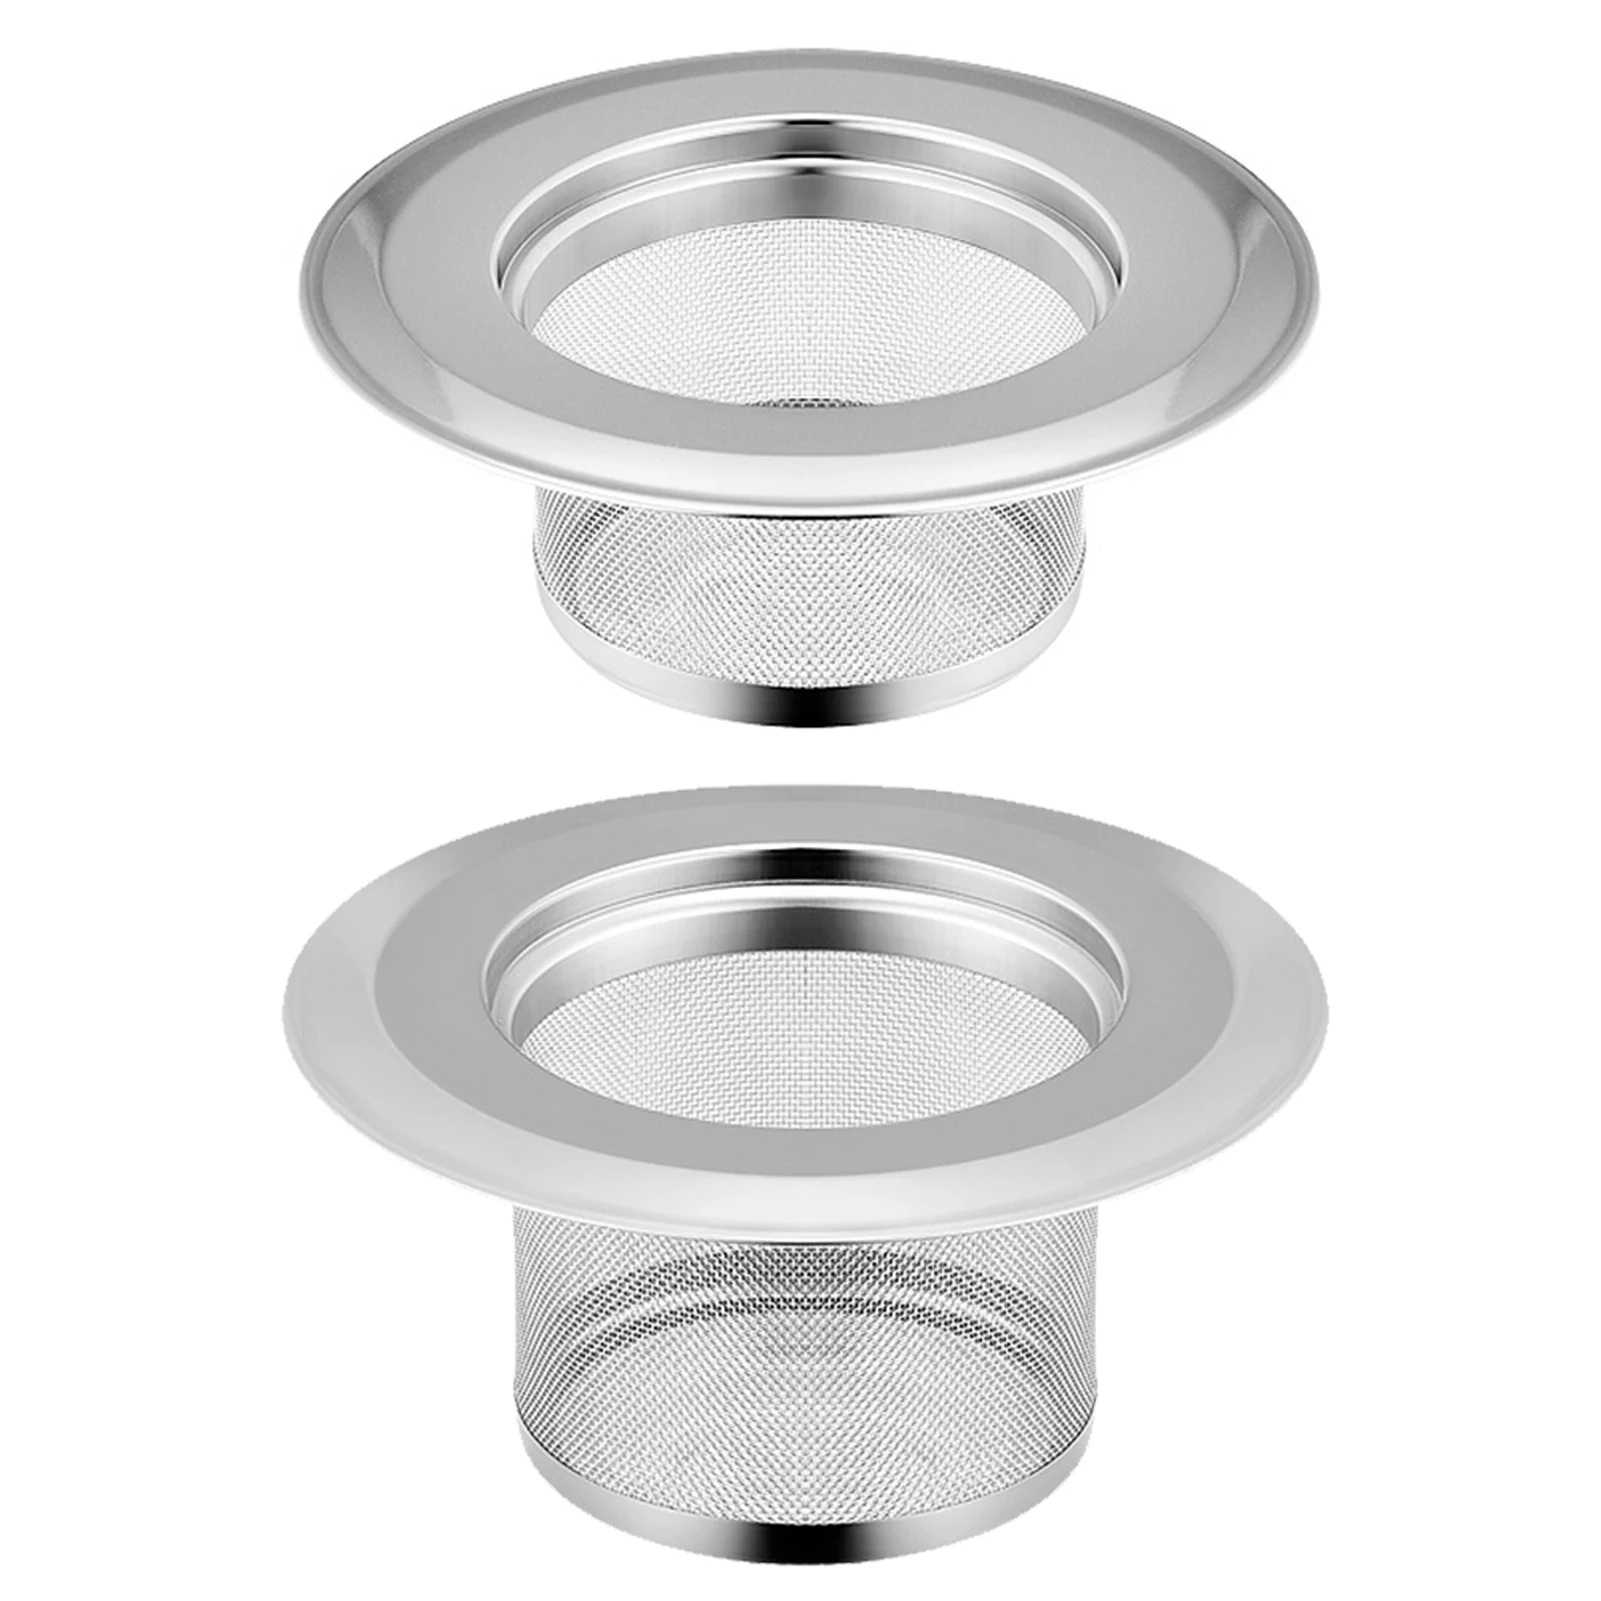 

2pcs Strainer Protective Bathroom Kitchen Stainless Steel Sink Drain Filter Mesh Easy Install Home Hotel Sliver Hair Catcher